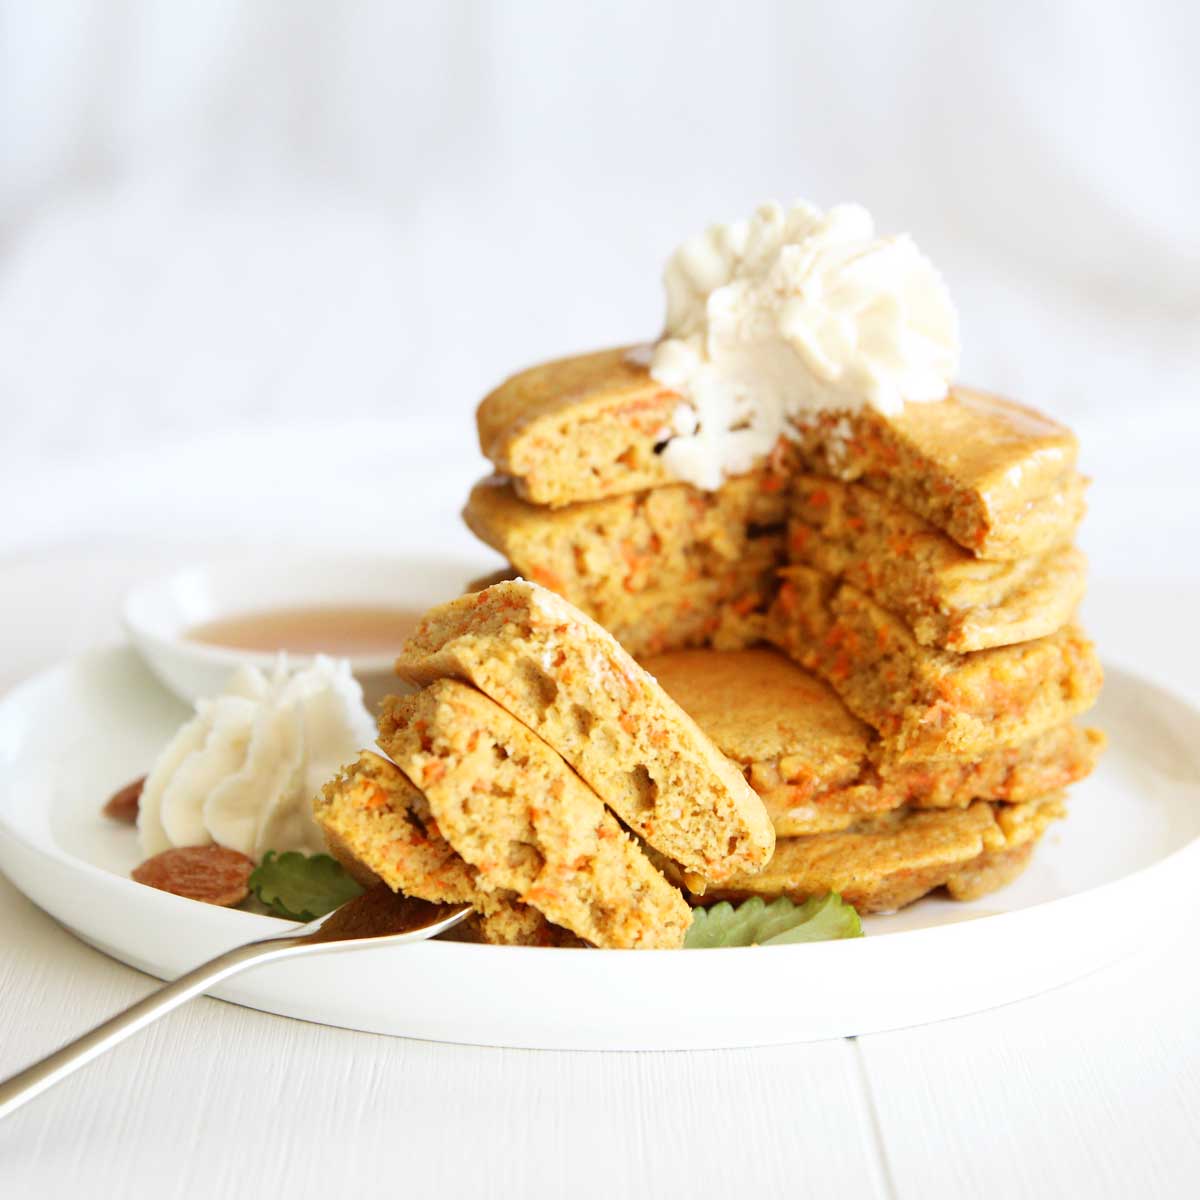 Healthy Carrot Cake Mochi Pancakes Made with Almond Flour - Cauliflower & Carrot Protein Balls